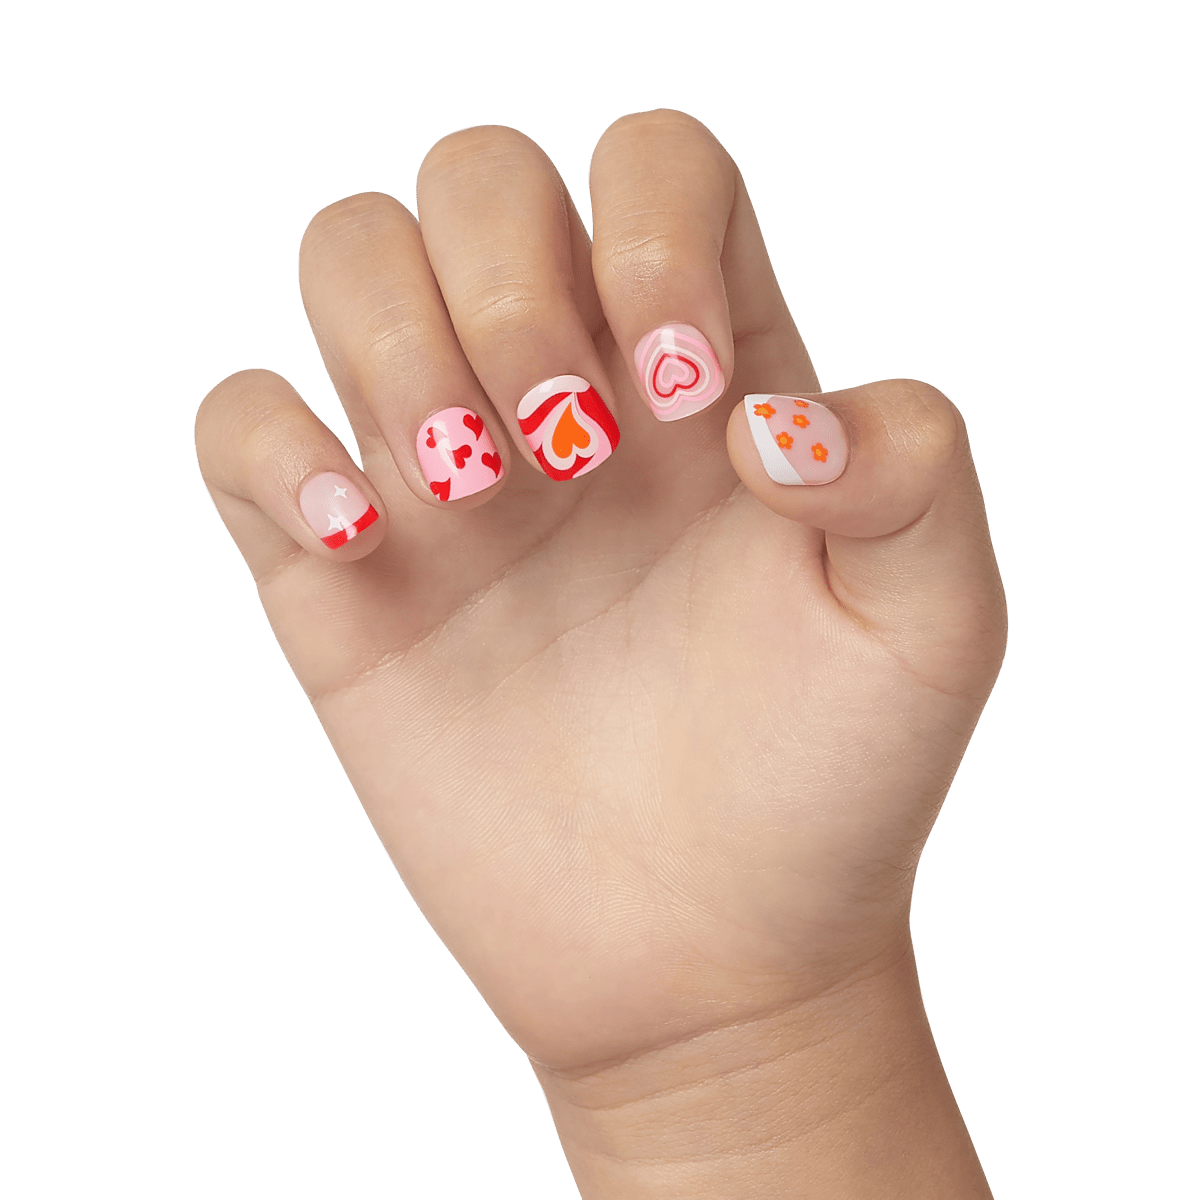 Buy NYAMAH SALES Kids Girls Press on Nails Children Acrylic Fake Nails,  Lovely Press on French Fake Nails for Kids Girls Christmas Gift Nail Design  Decoration - 96pc, Multi Design & Color.